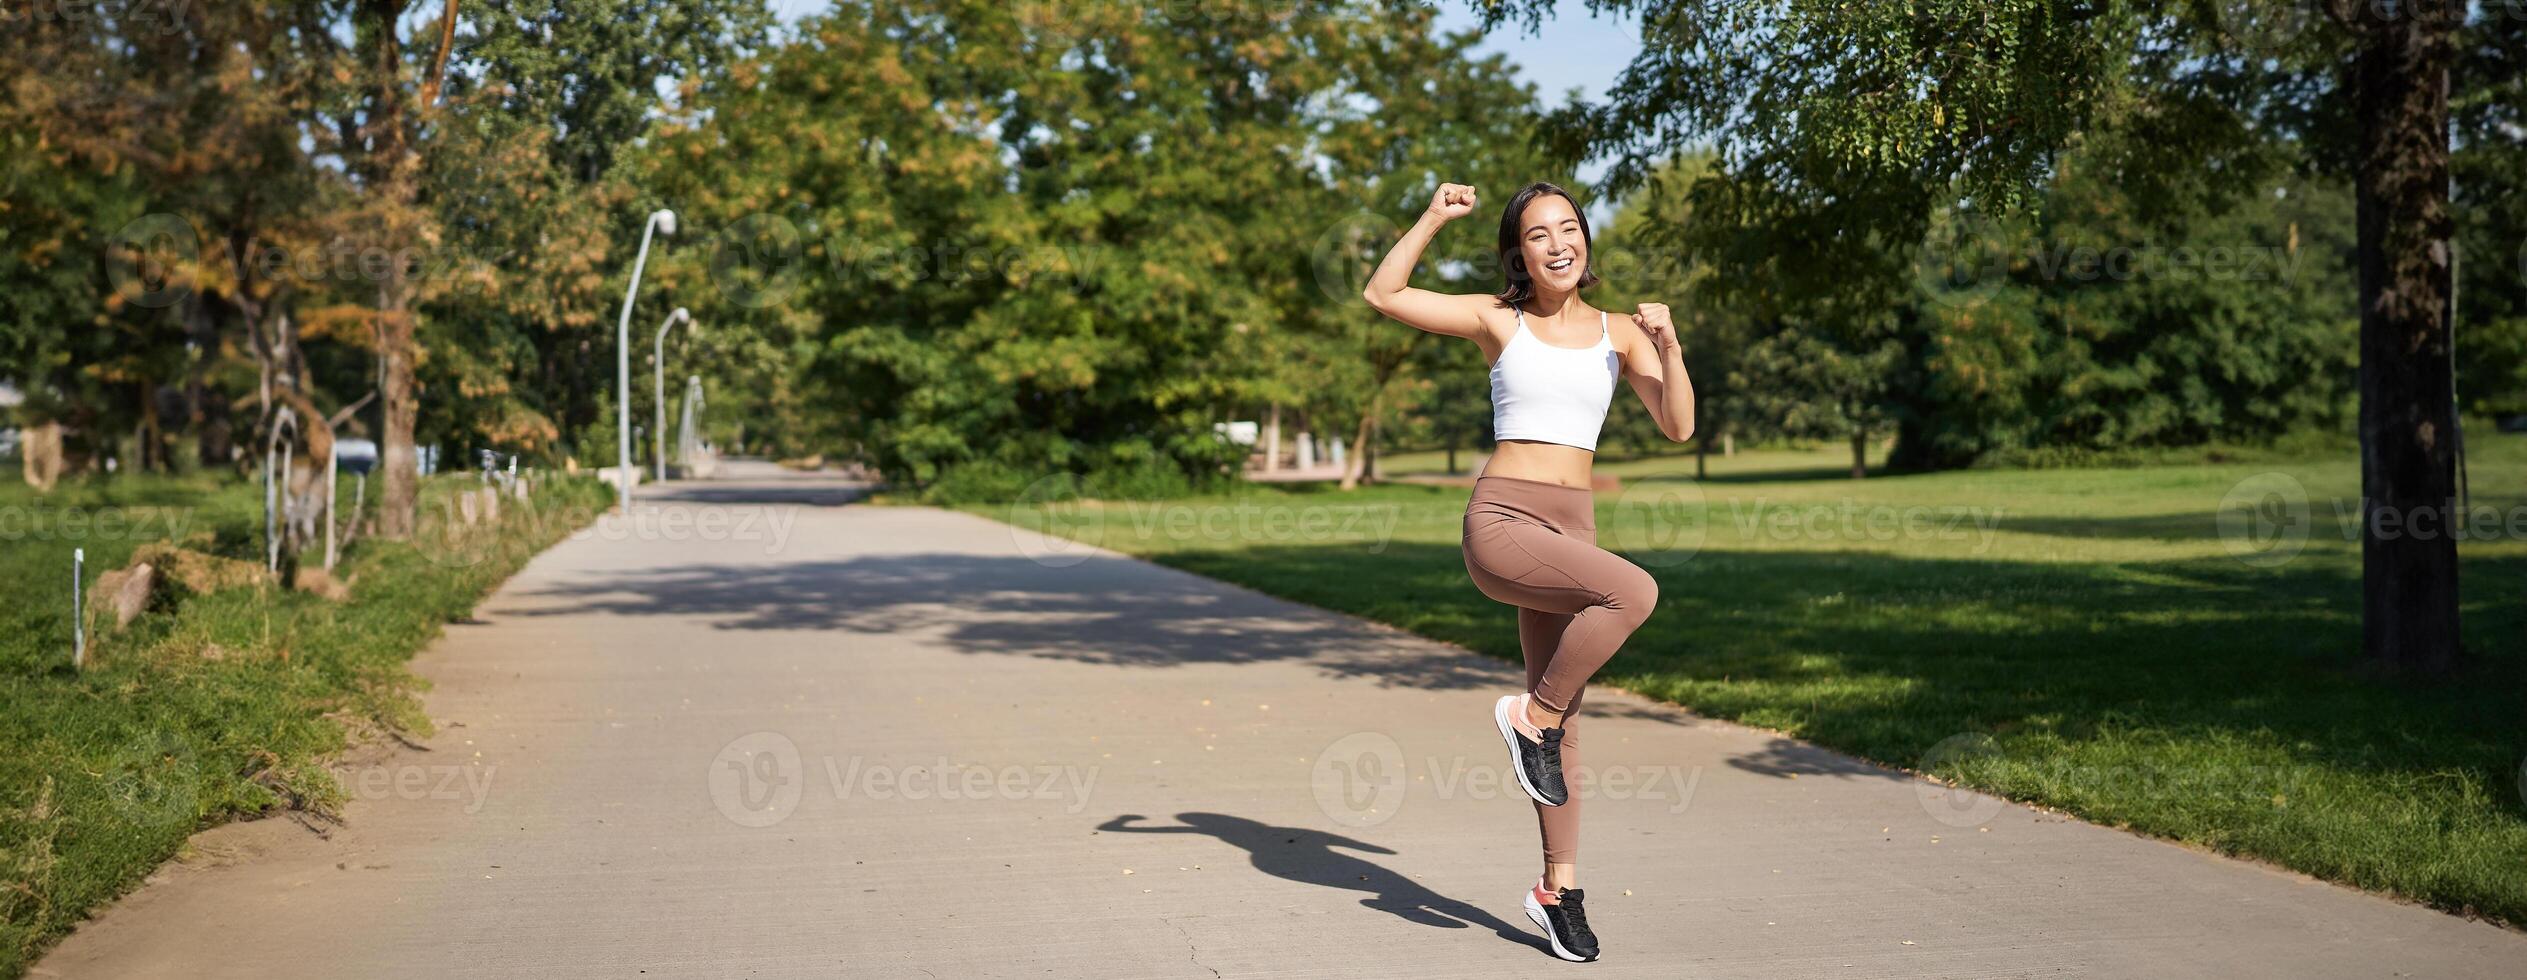 Excited young asian woman winning, finish running in park, saying yes, lifting hand up in triumph, celebrating victory or success photo